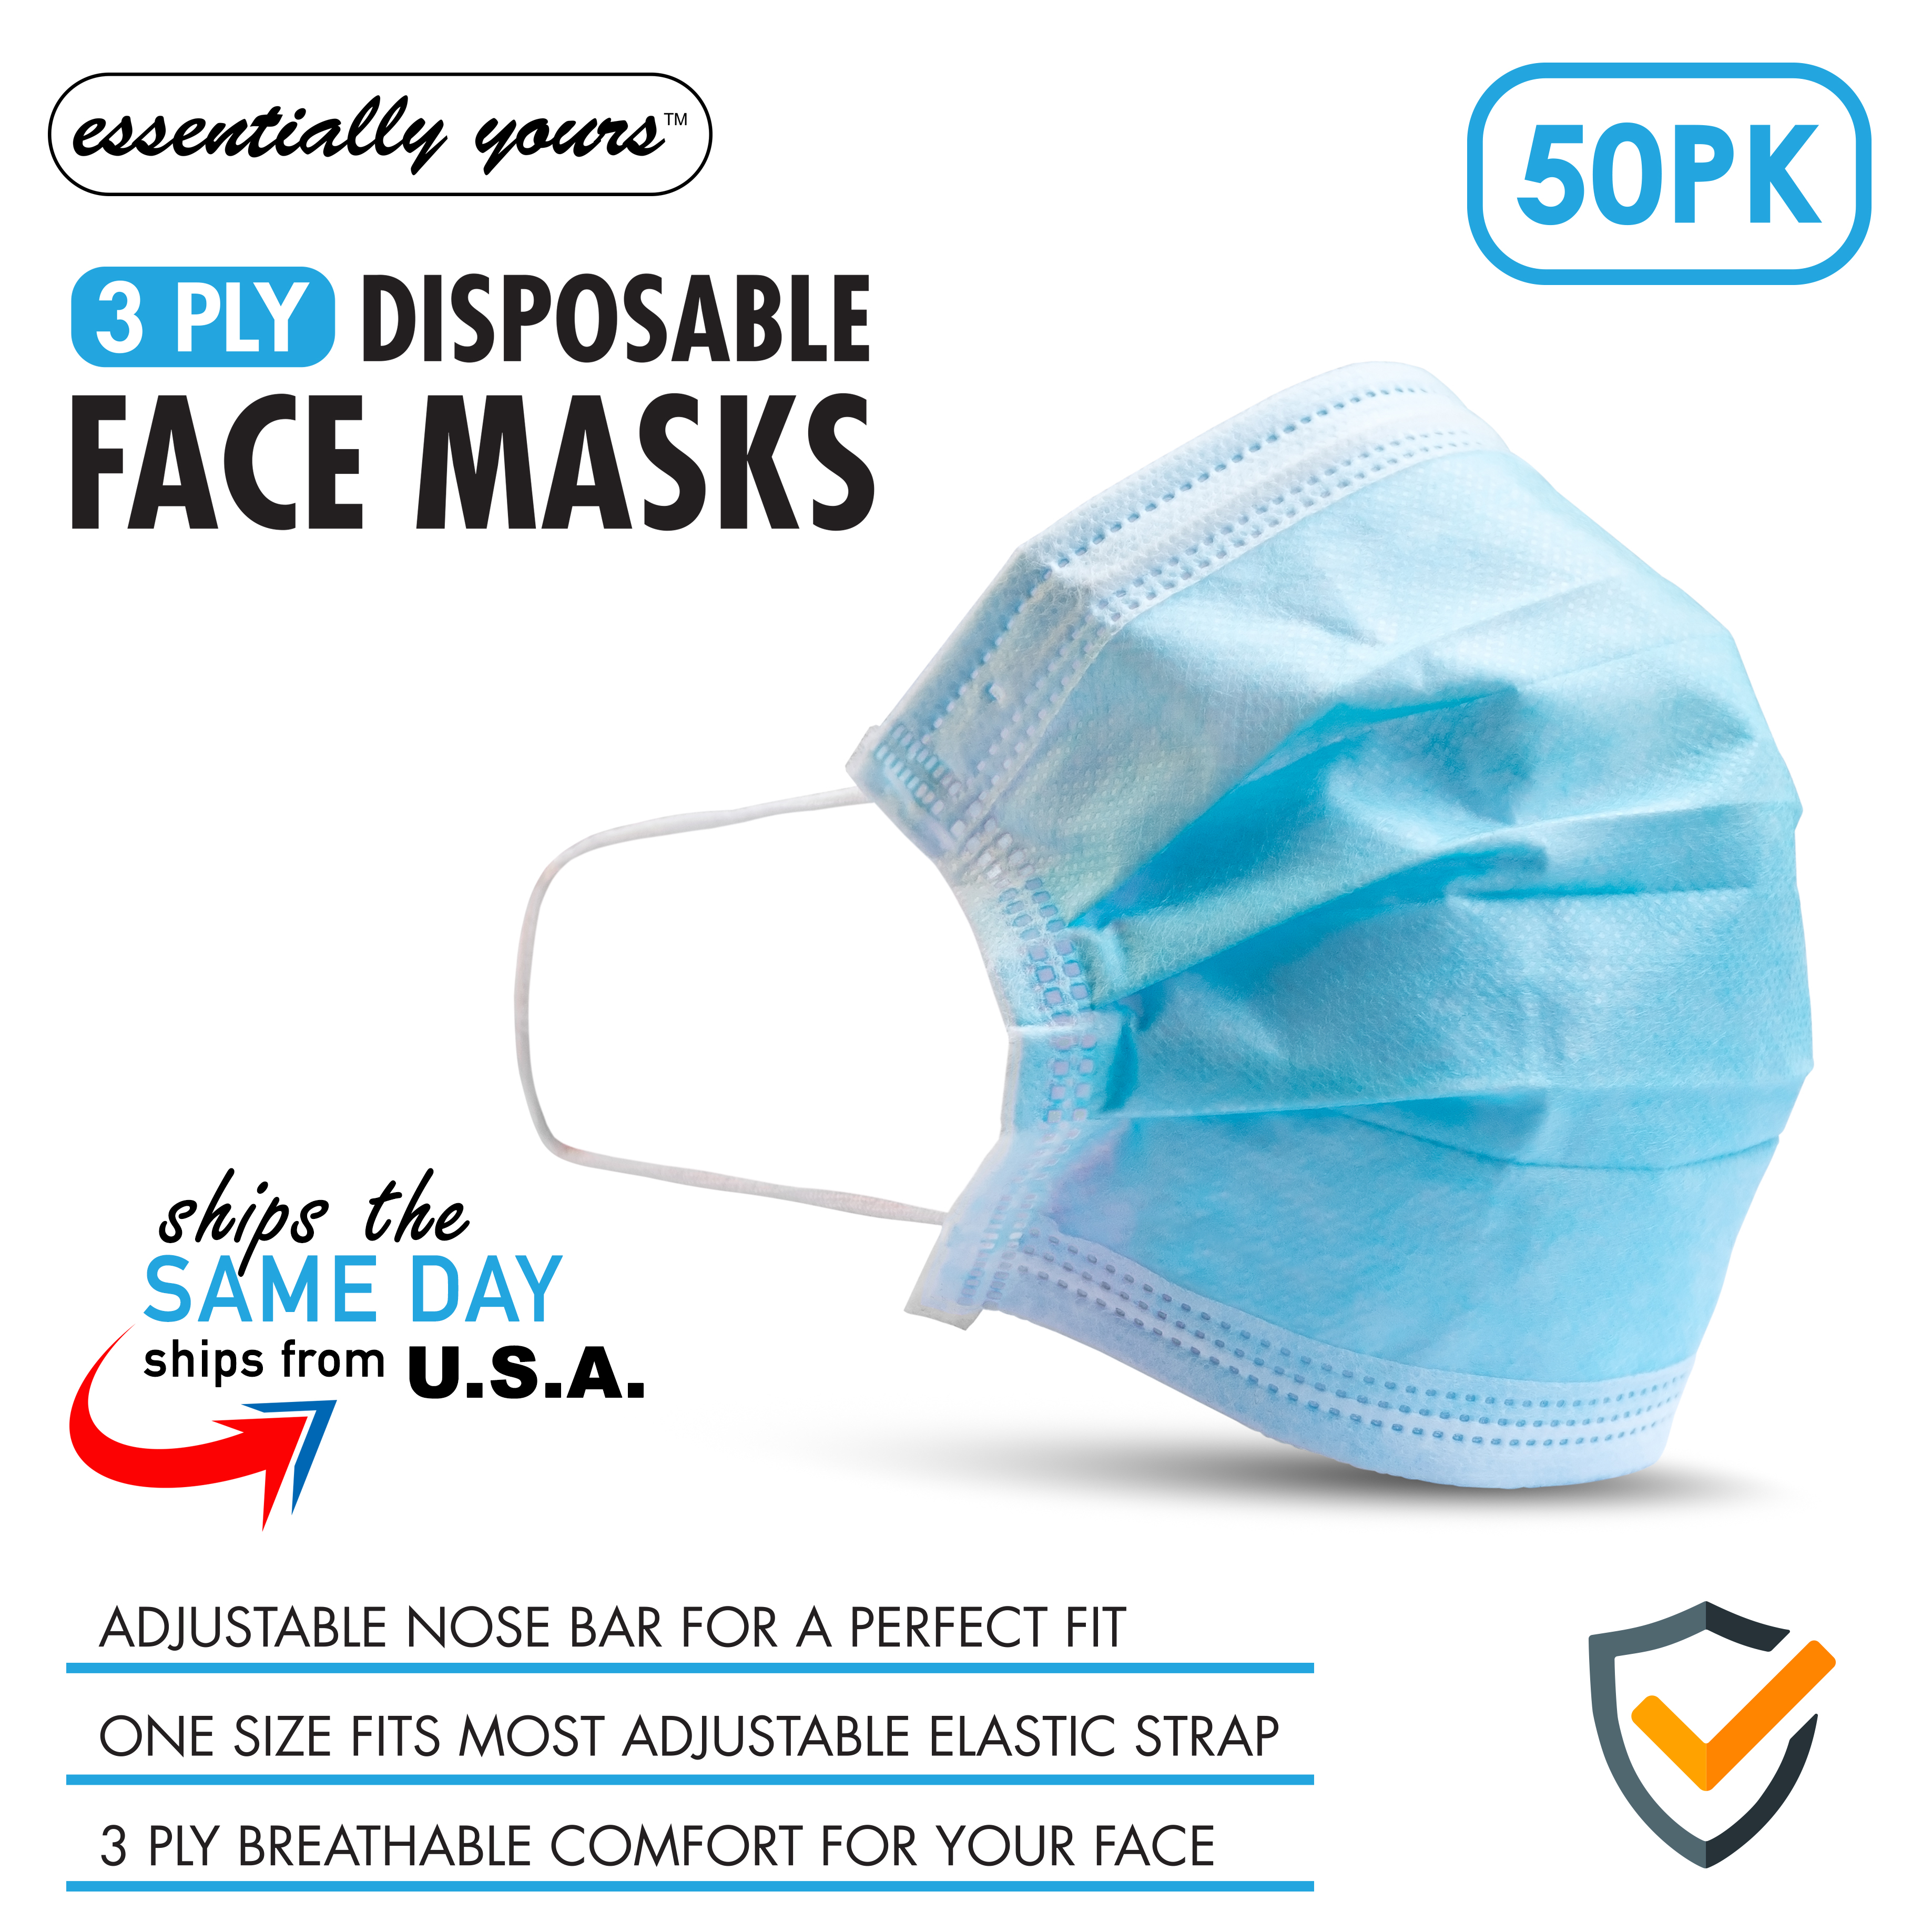 3 Ply Ear Loop Disposable Face Masks, 50-Count - image 1 of 3